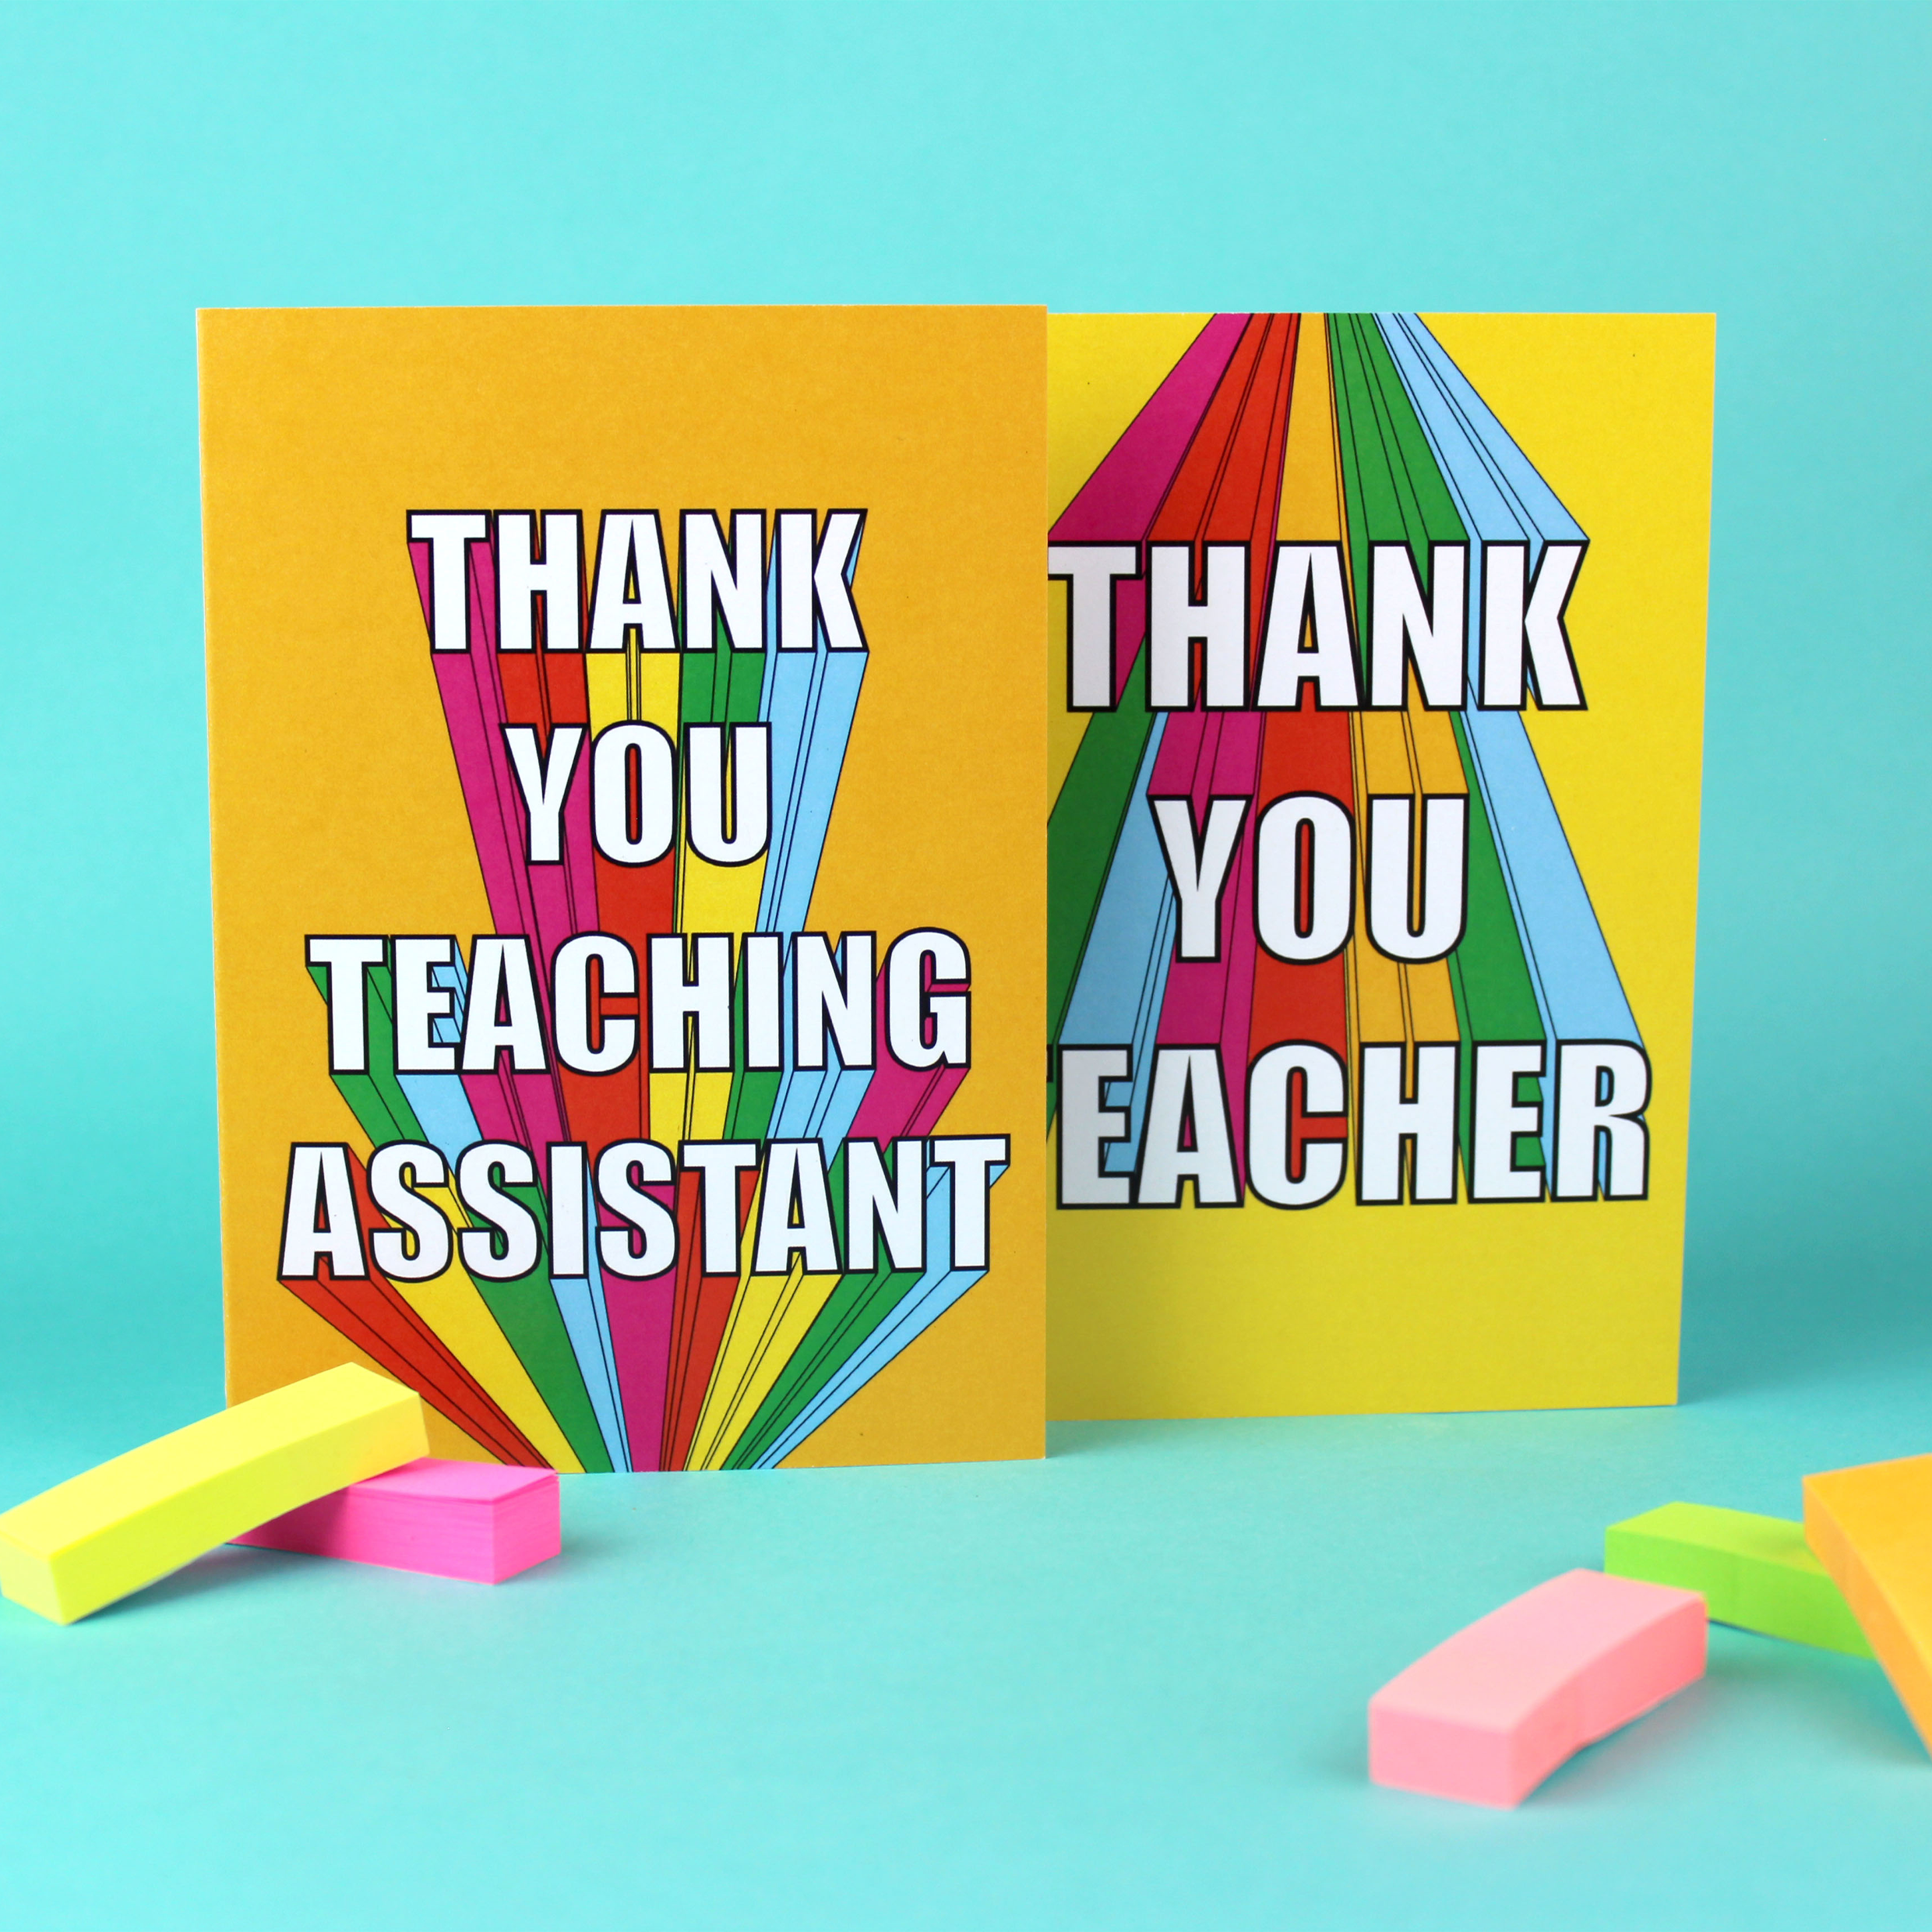 Two cards are shown, one with a yellow background and one with an orange background. Both cards have rainbow block lettering. One card reads Thank you teaching assistant. The other reads Thank you teacher.